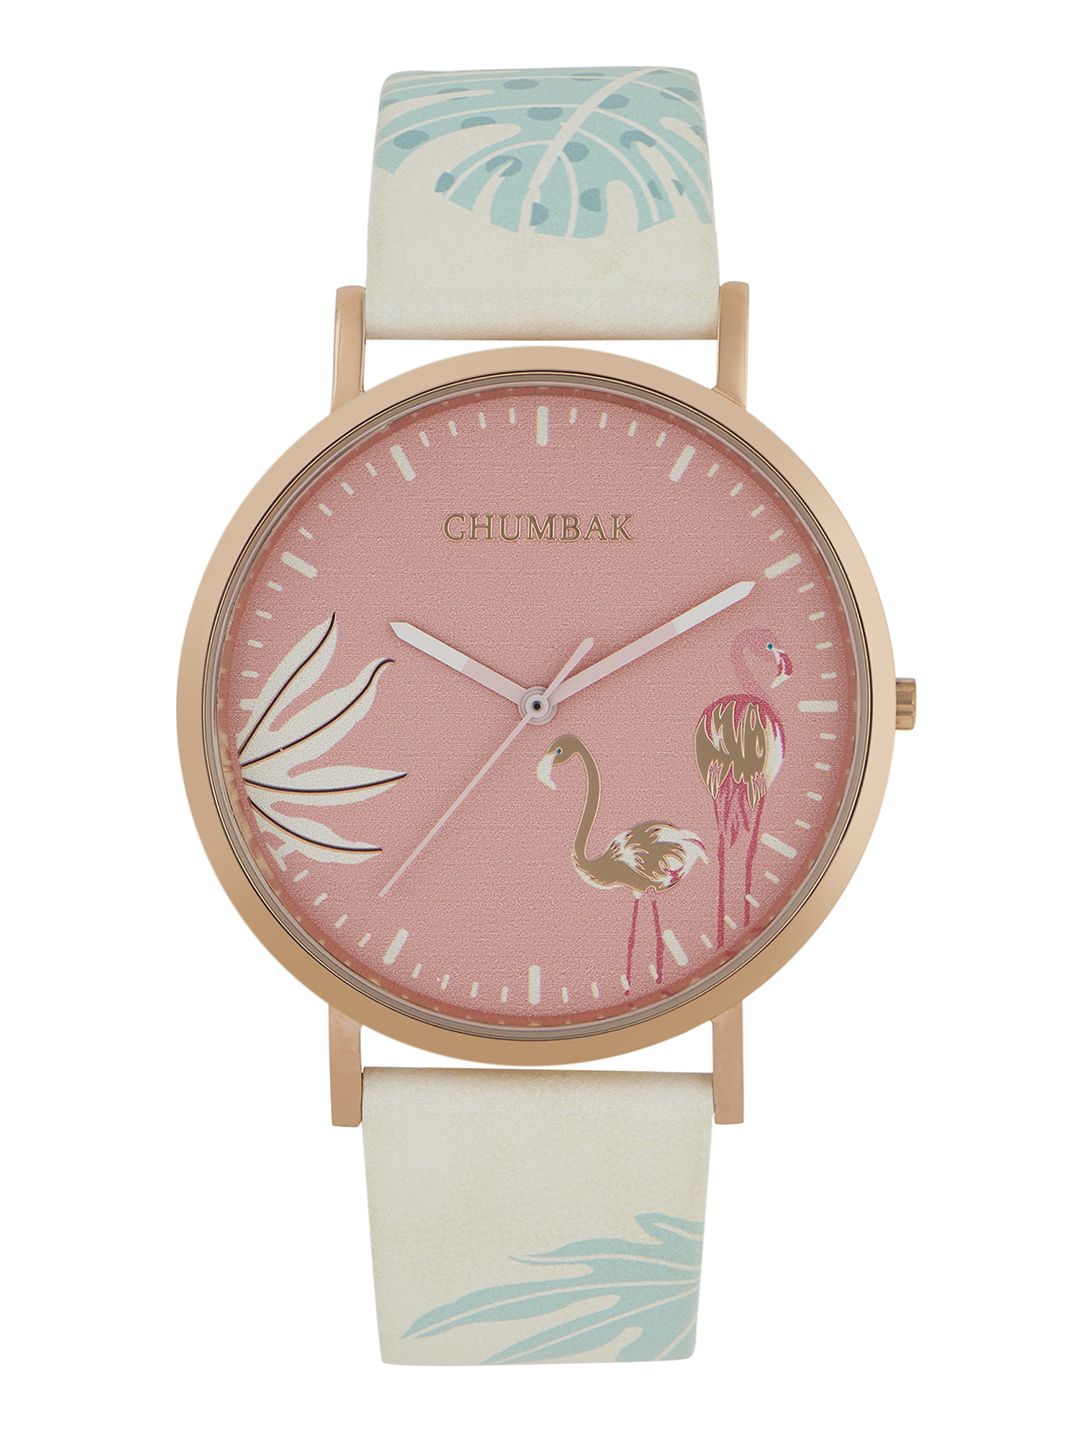 Chumbak Women Pink Printed Dial Leather Straps Analogue Watch 8907605106033 Price in India